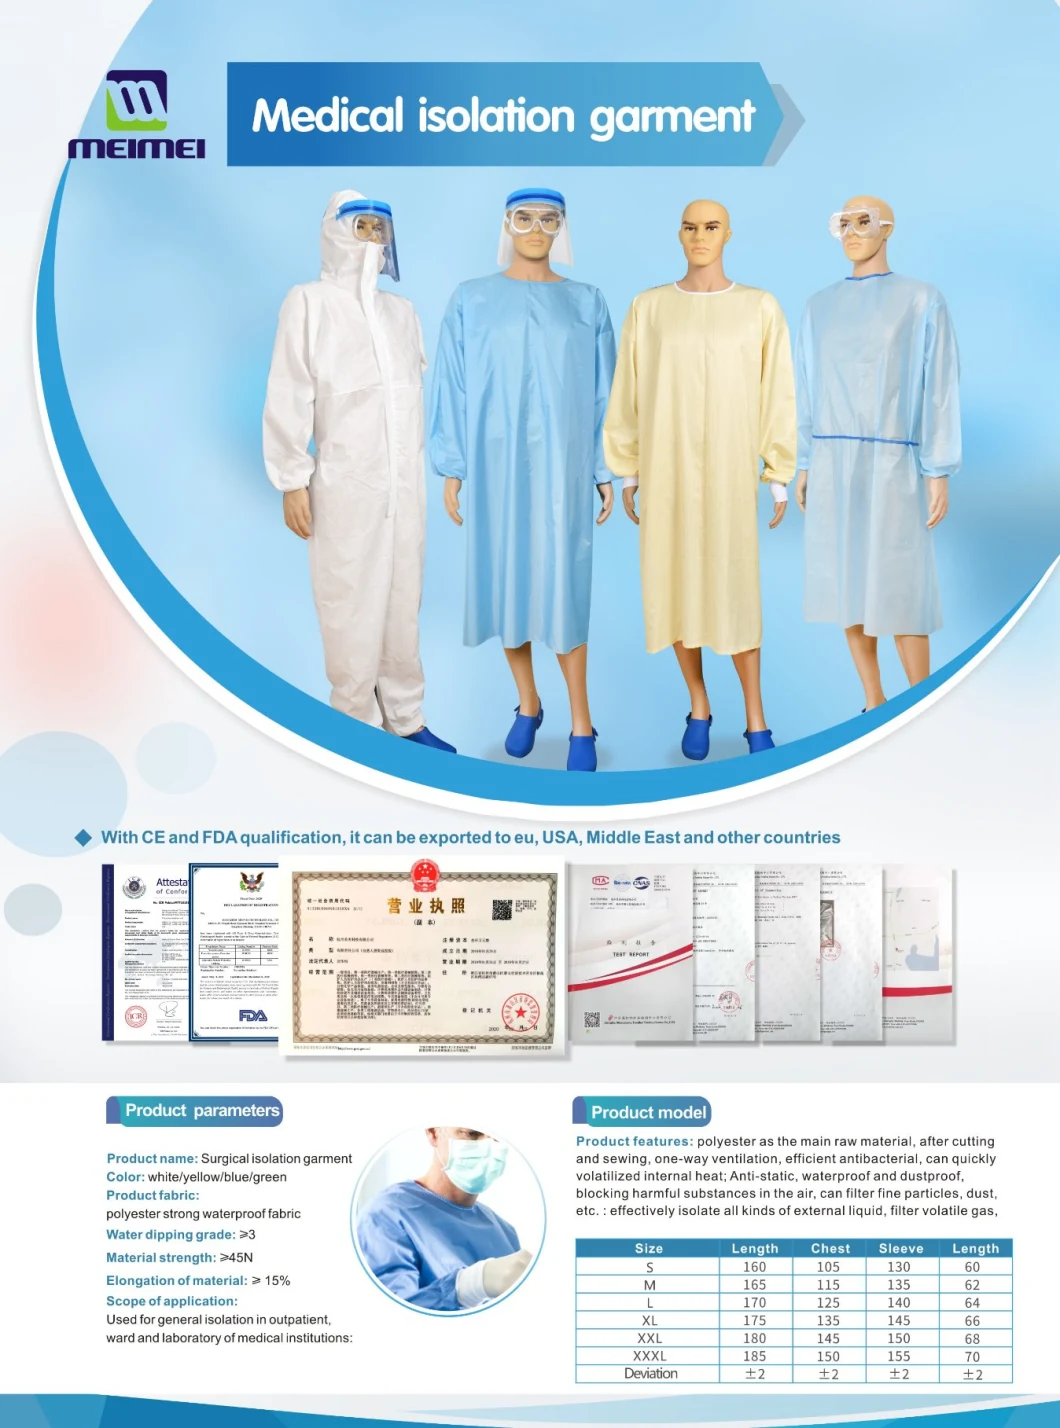 Medical Garments Clothing Clothes Fabrics Apparel Protective Clothing Supplies Isolation Gown Medical Coverall Overall Clinical Clothing